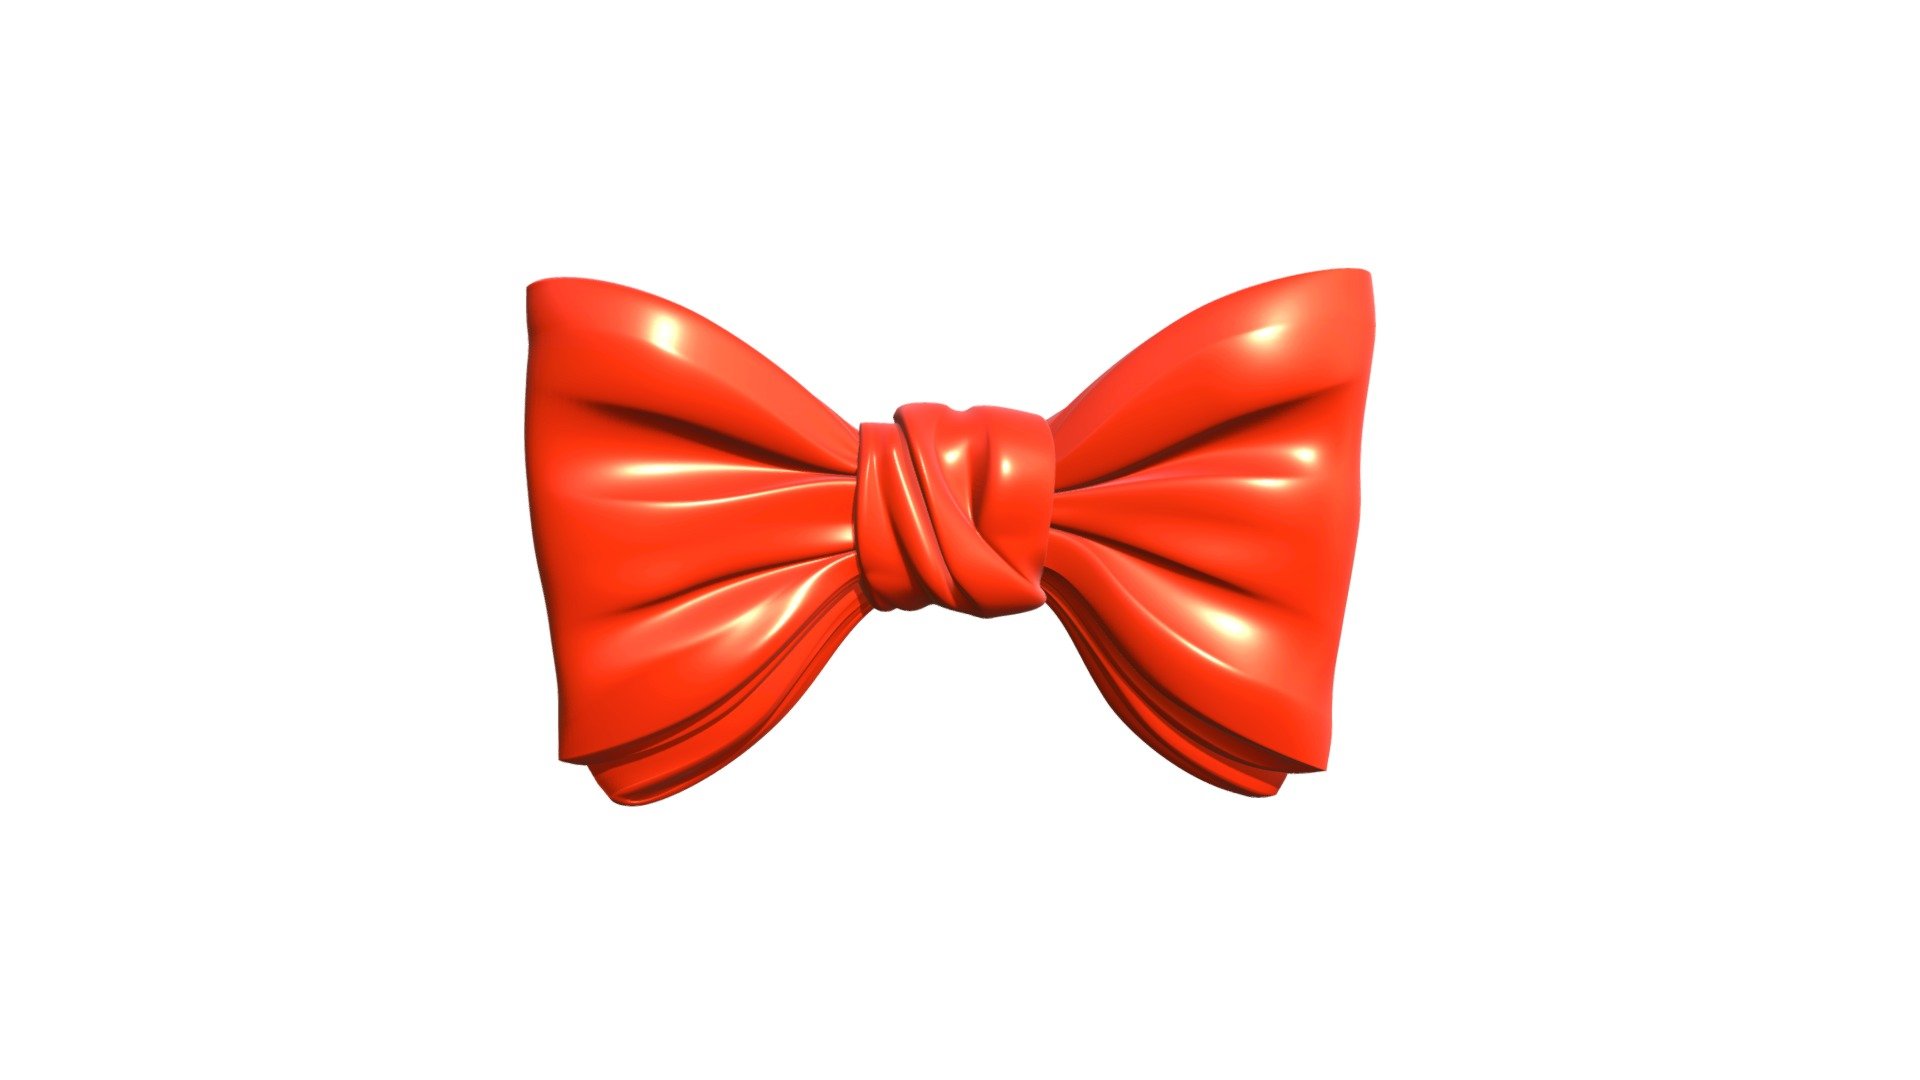 Highpoly model of bow knot. Ready for 3d-print. Size: 63 x 10 x 42 mm. Volume: 13.39 cm3 3d model